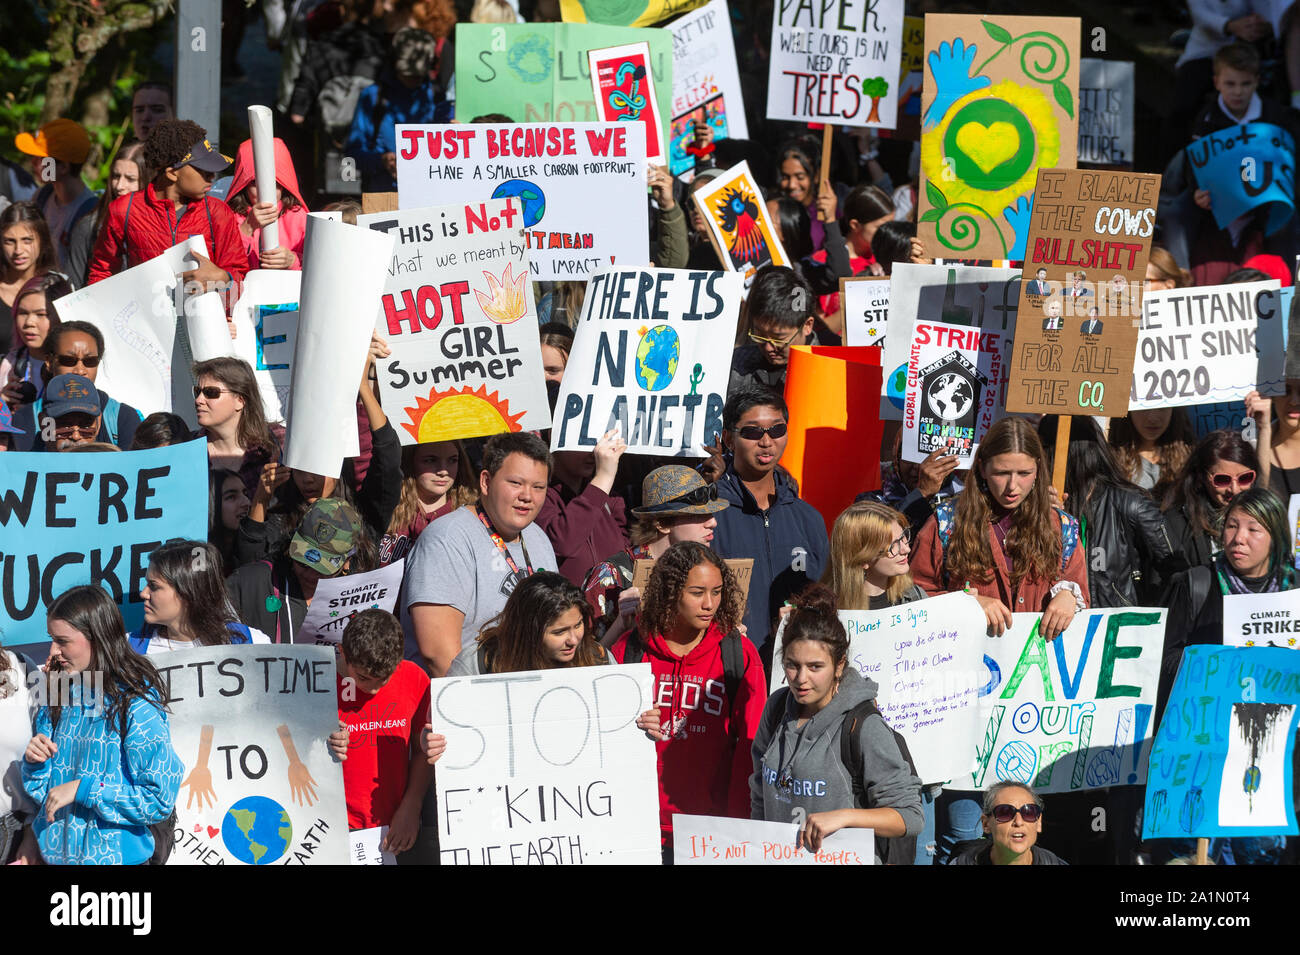 Vancouver, Canada. 27, September 2019. Placards being held by protesters. Climate Strike Protest. Vancouver, British Columbia, Canada. Gerry Rousseau/Alamy Live News Stock Photo